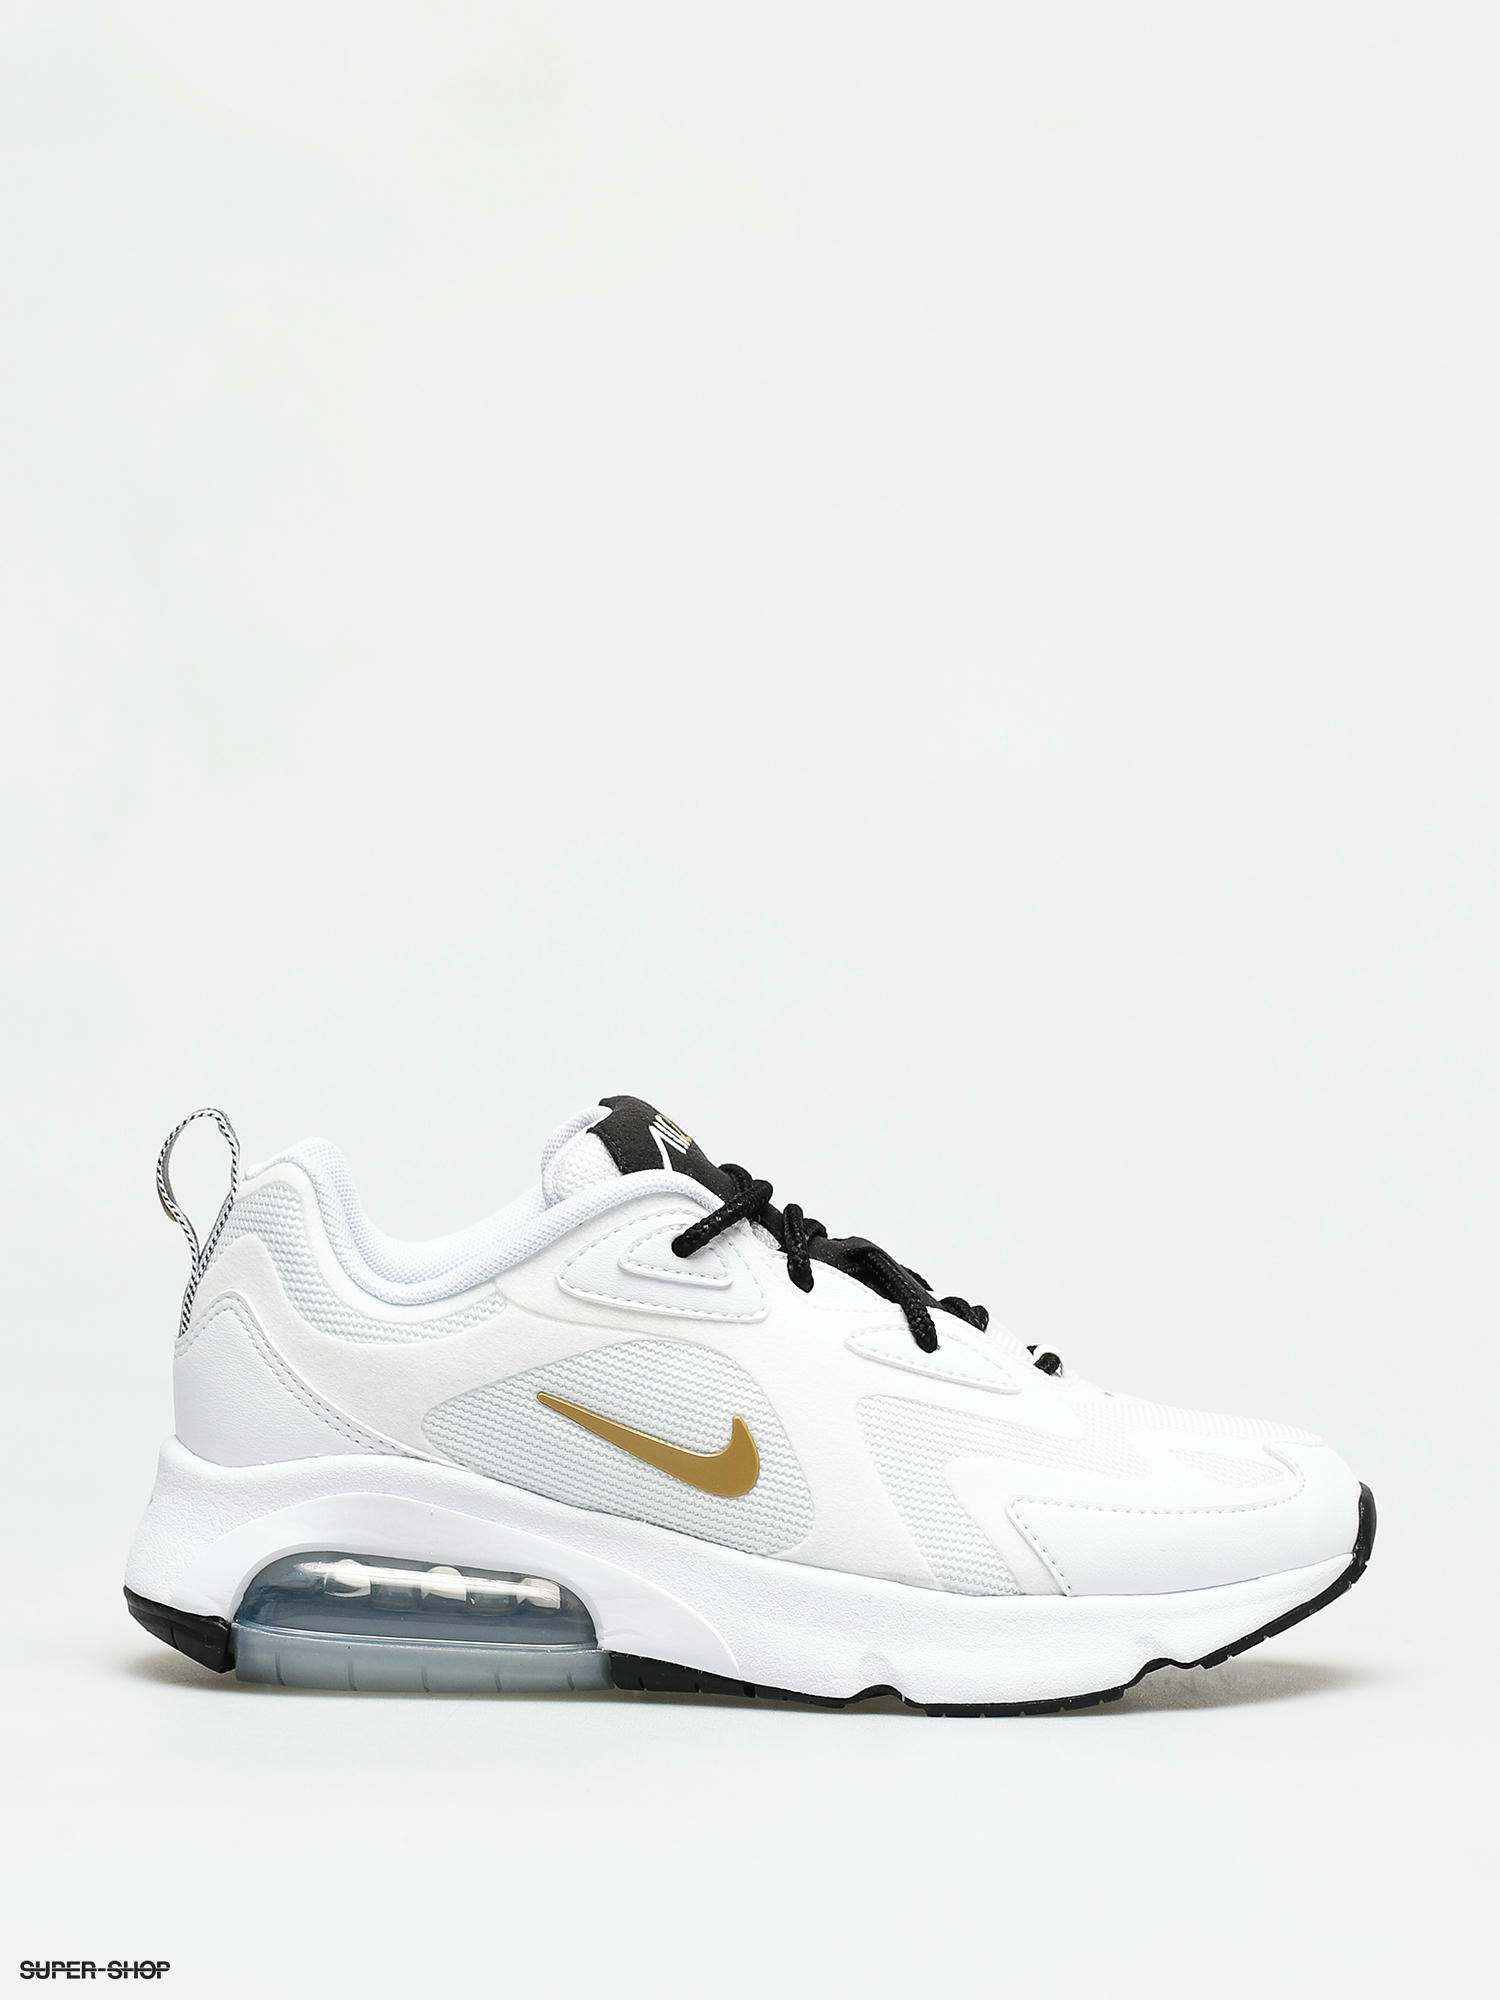 white black and gold air max